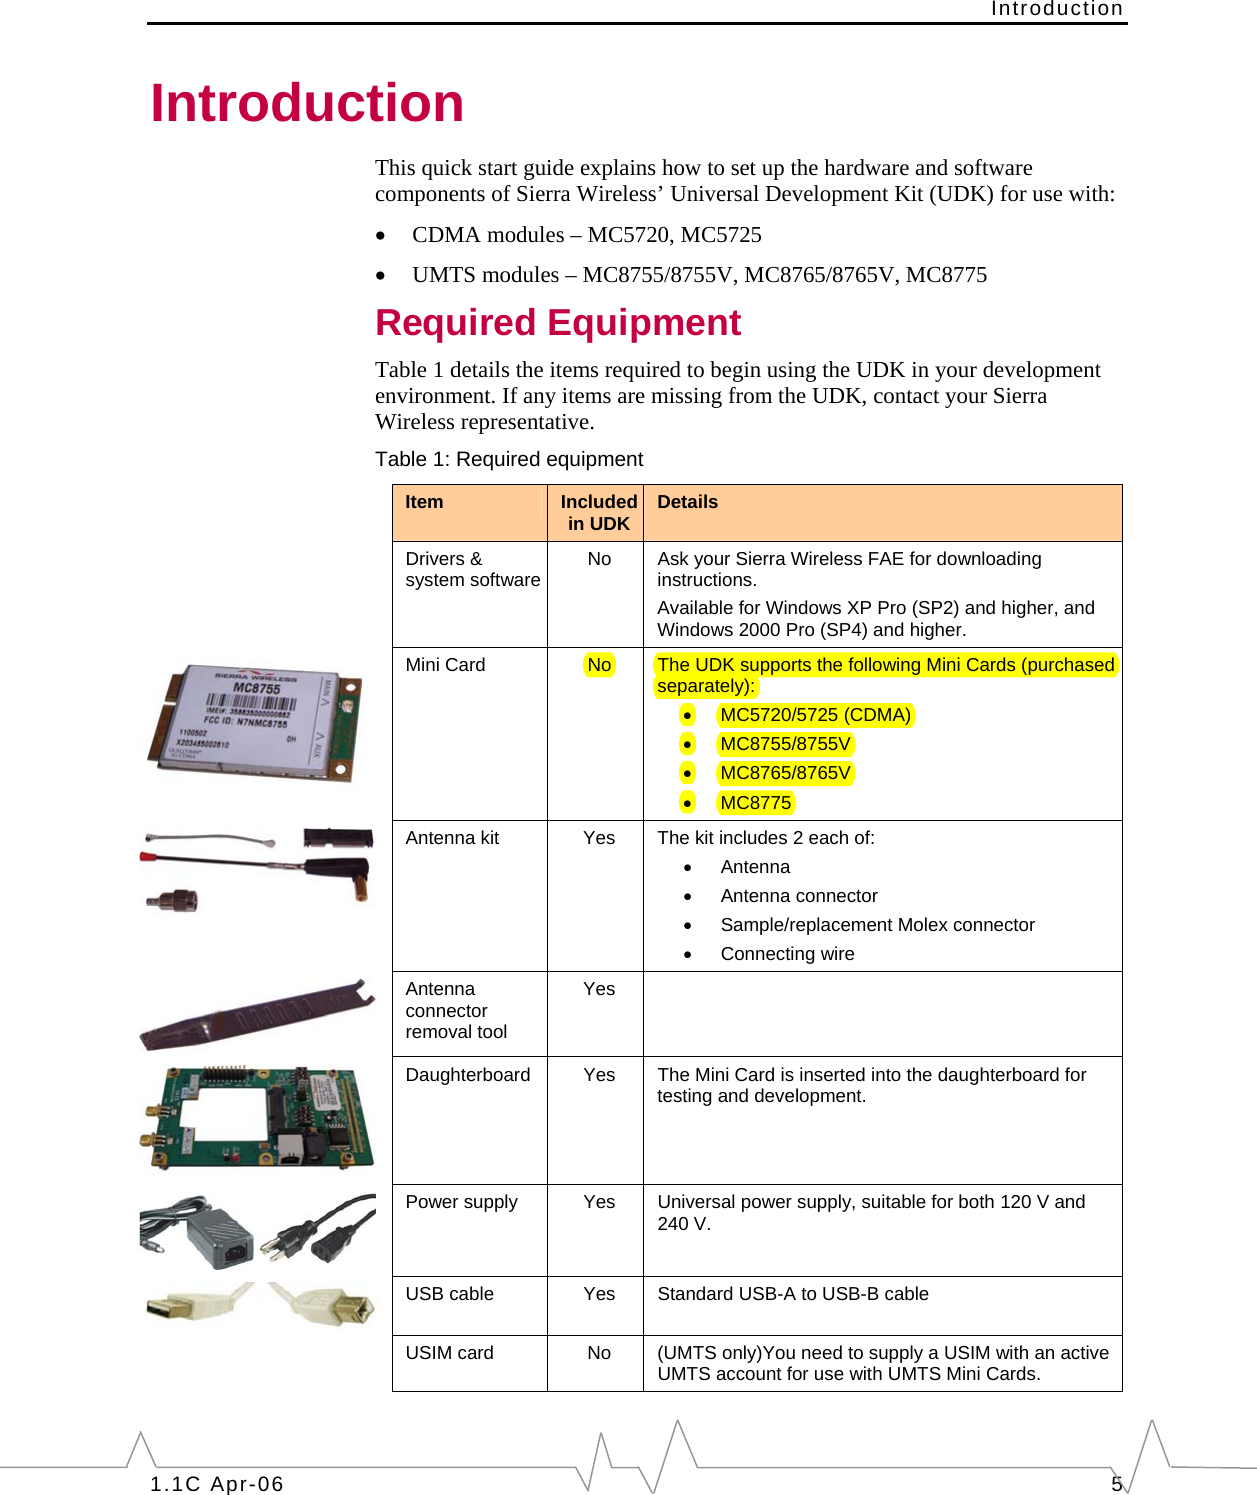 Introduction Introduction This quick start guide explains how to set up the hardware and software components of Sierra Wireless’ Universal Development Kit (UDK) for use with: •  CDMA modules – MC5720, MC5725 •  UMTS modules – MC8755/8755V, MC8765/8765V, MC8775 Required Equipment Table 1 details the items required to begin using the UDK in your development environment. If any items are missing from the UDK, contact your Sierra Wireless representative. Table 1: Required equipment  Item  Included in UDK  Details  Drivers &amp; system software No  Ask your Sierra Wireless FAE for downloading instructions. Available for Windows XP Pro (SP2) and higher, and Windows 2000 Pro (SP4) and higher.  Mini Card  No  The UDK supports the following Mini Cards (purchased separately): •  MC5720/5725 (CDMA) •  MC8755/8755V •  MC8765/8765V •  MC8775  Antenna kit  Yes  The kit includes 2 each of: •  Antenna •  Antenna connector •  Sample/replacement Molex connector •  Connecting wire  Antenna connector removal tool Yes   Daughterboard  Yes  The Mini Card is inserted into the daughterboard for testing and development.  Power supply  Yes  Universal power supply, suitable for both 120 V and 240 V.  USB cable  Yes  Standard USB-A to USB-B cable   USIM card  No  (UMTS only)You need to supply a USIM with an active UMTS account for use with UMTS Mini Cards. 1.1C Apr-06   5 